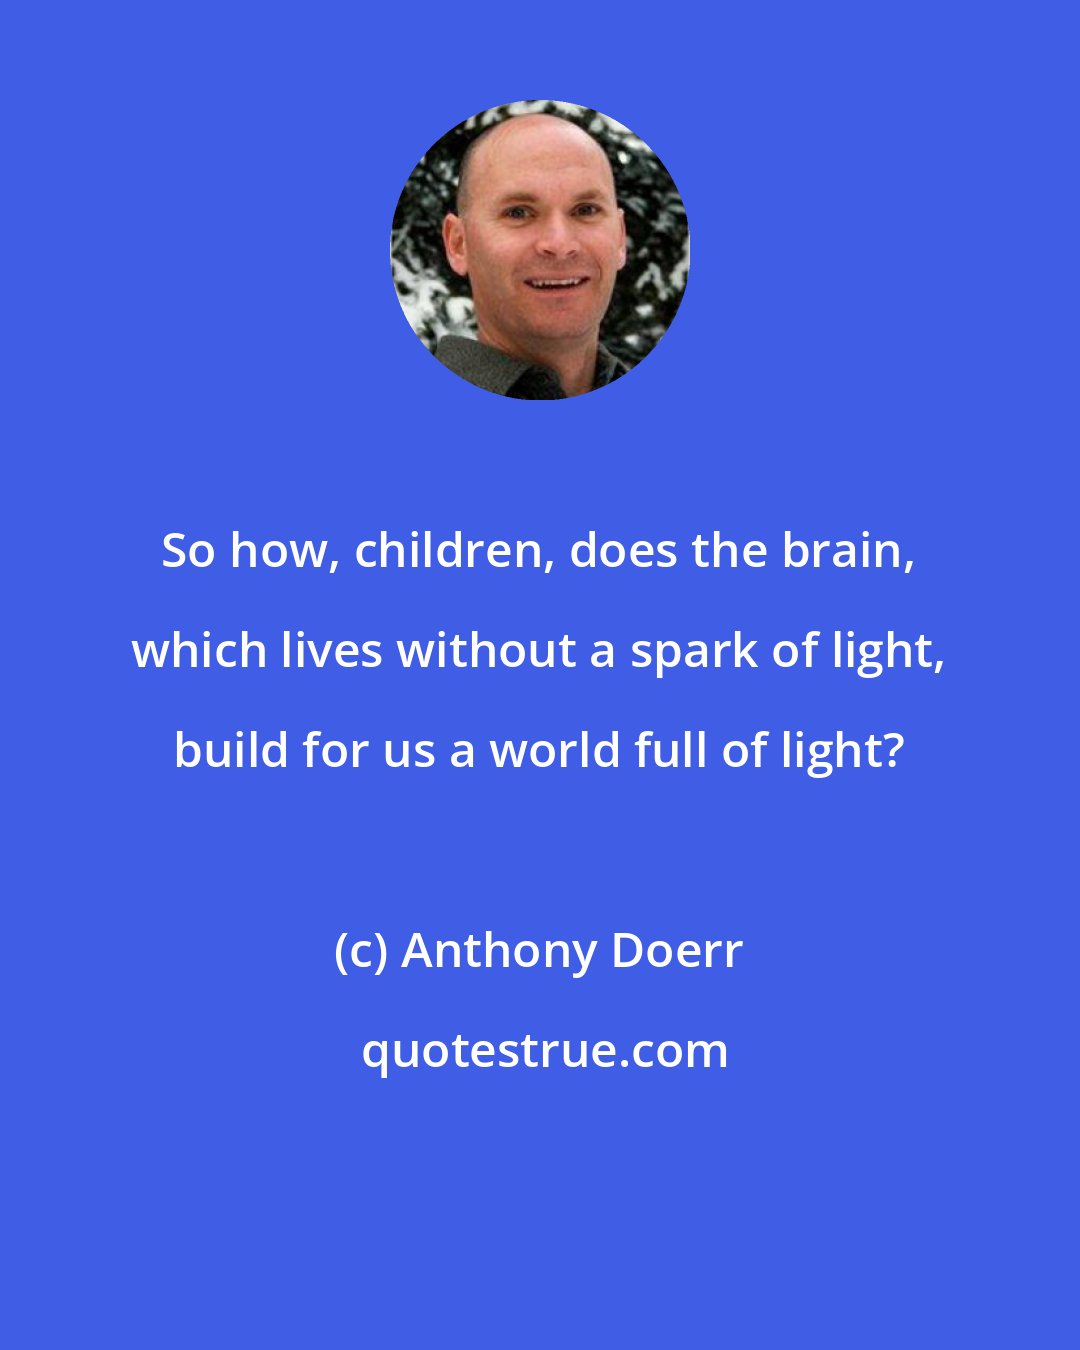 Anthony Doerr: So how, children, does the brain, which lives without a spark of light, build for us a world full of light?